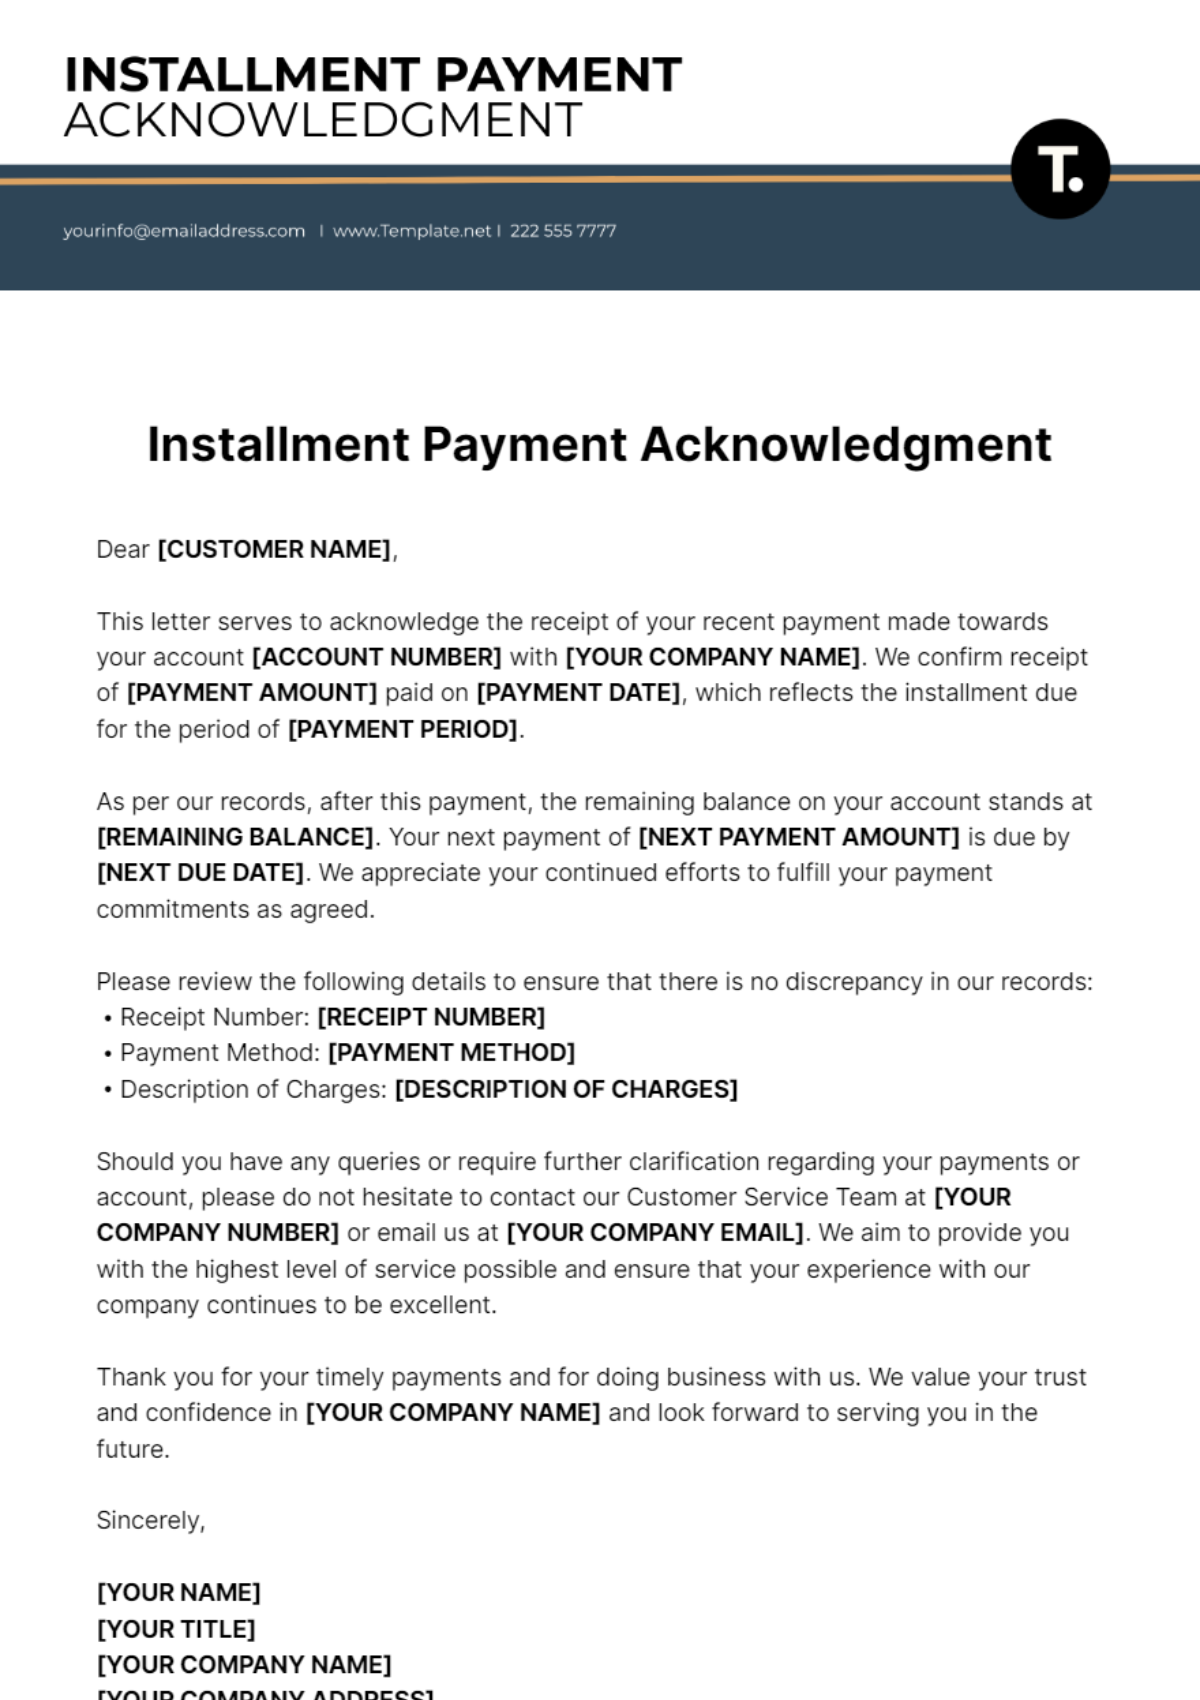 Installment Payment Acknowledgment Template